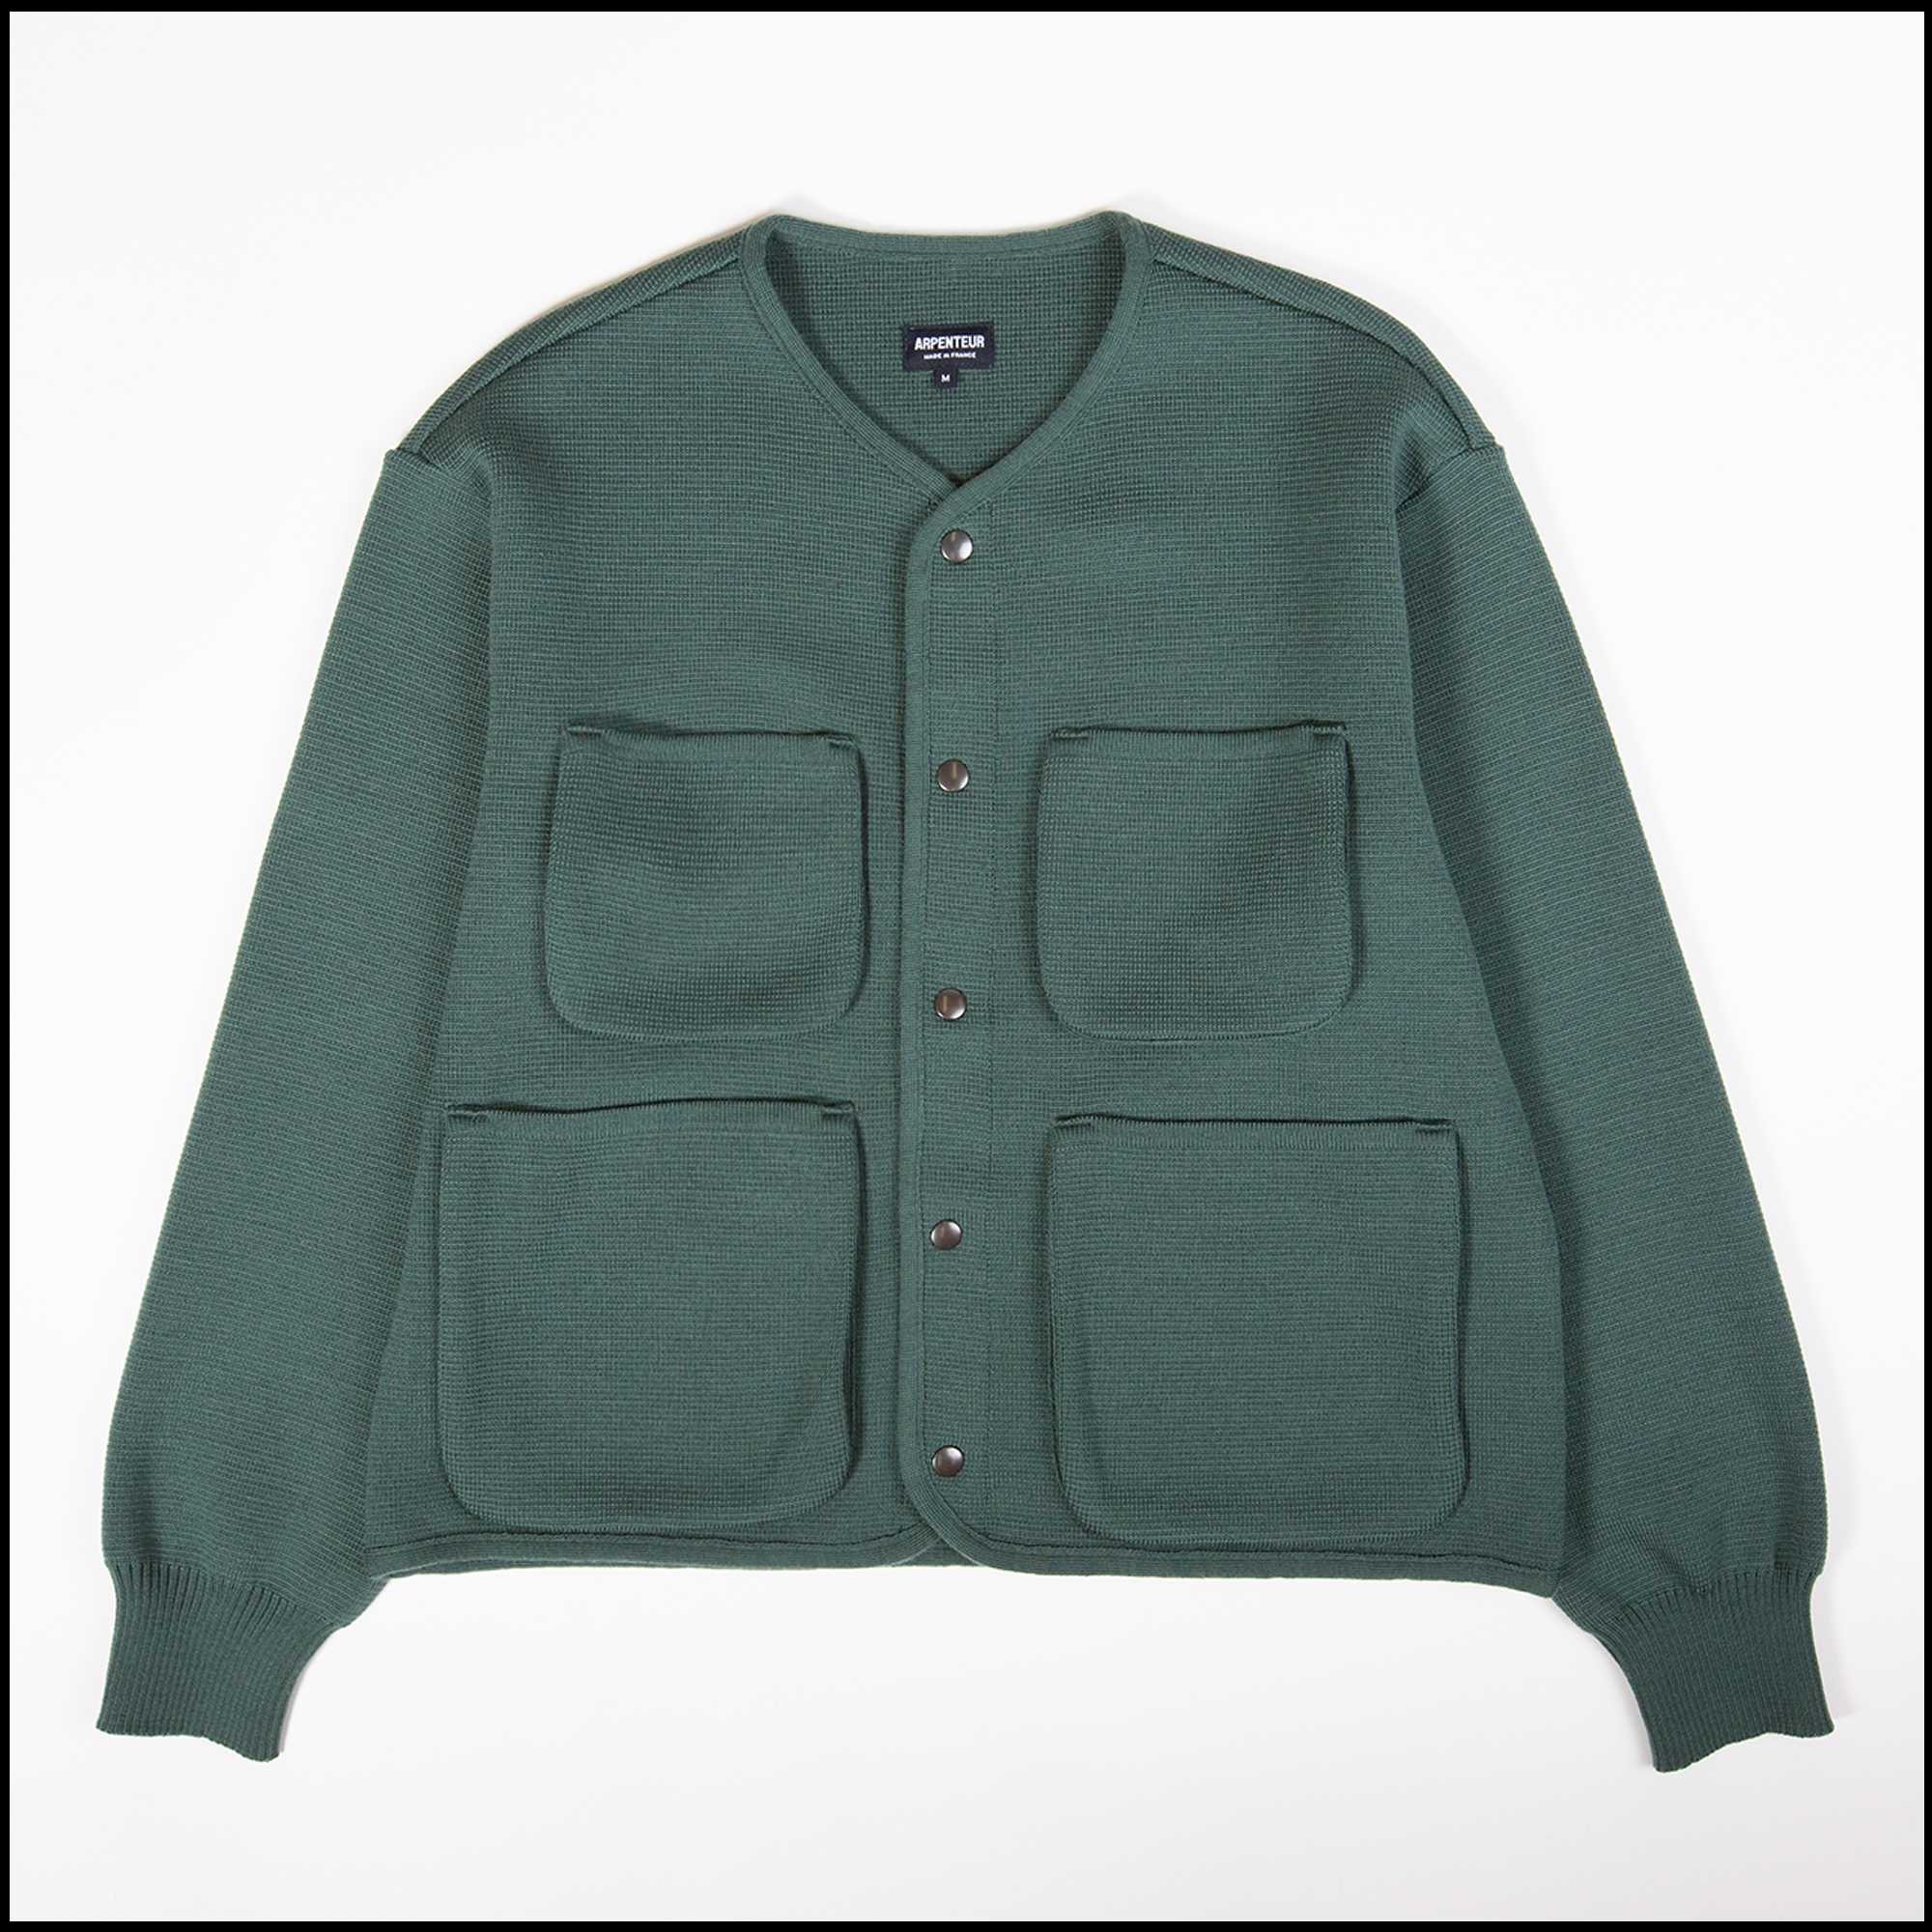 George cardigan in Emerald color by Arpenteur